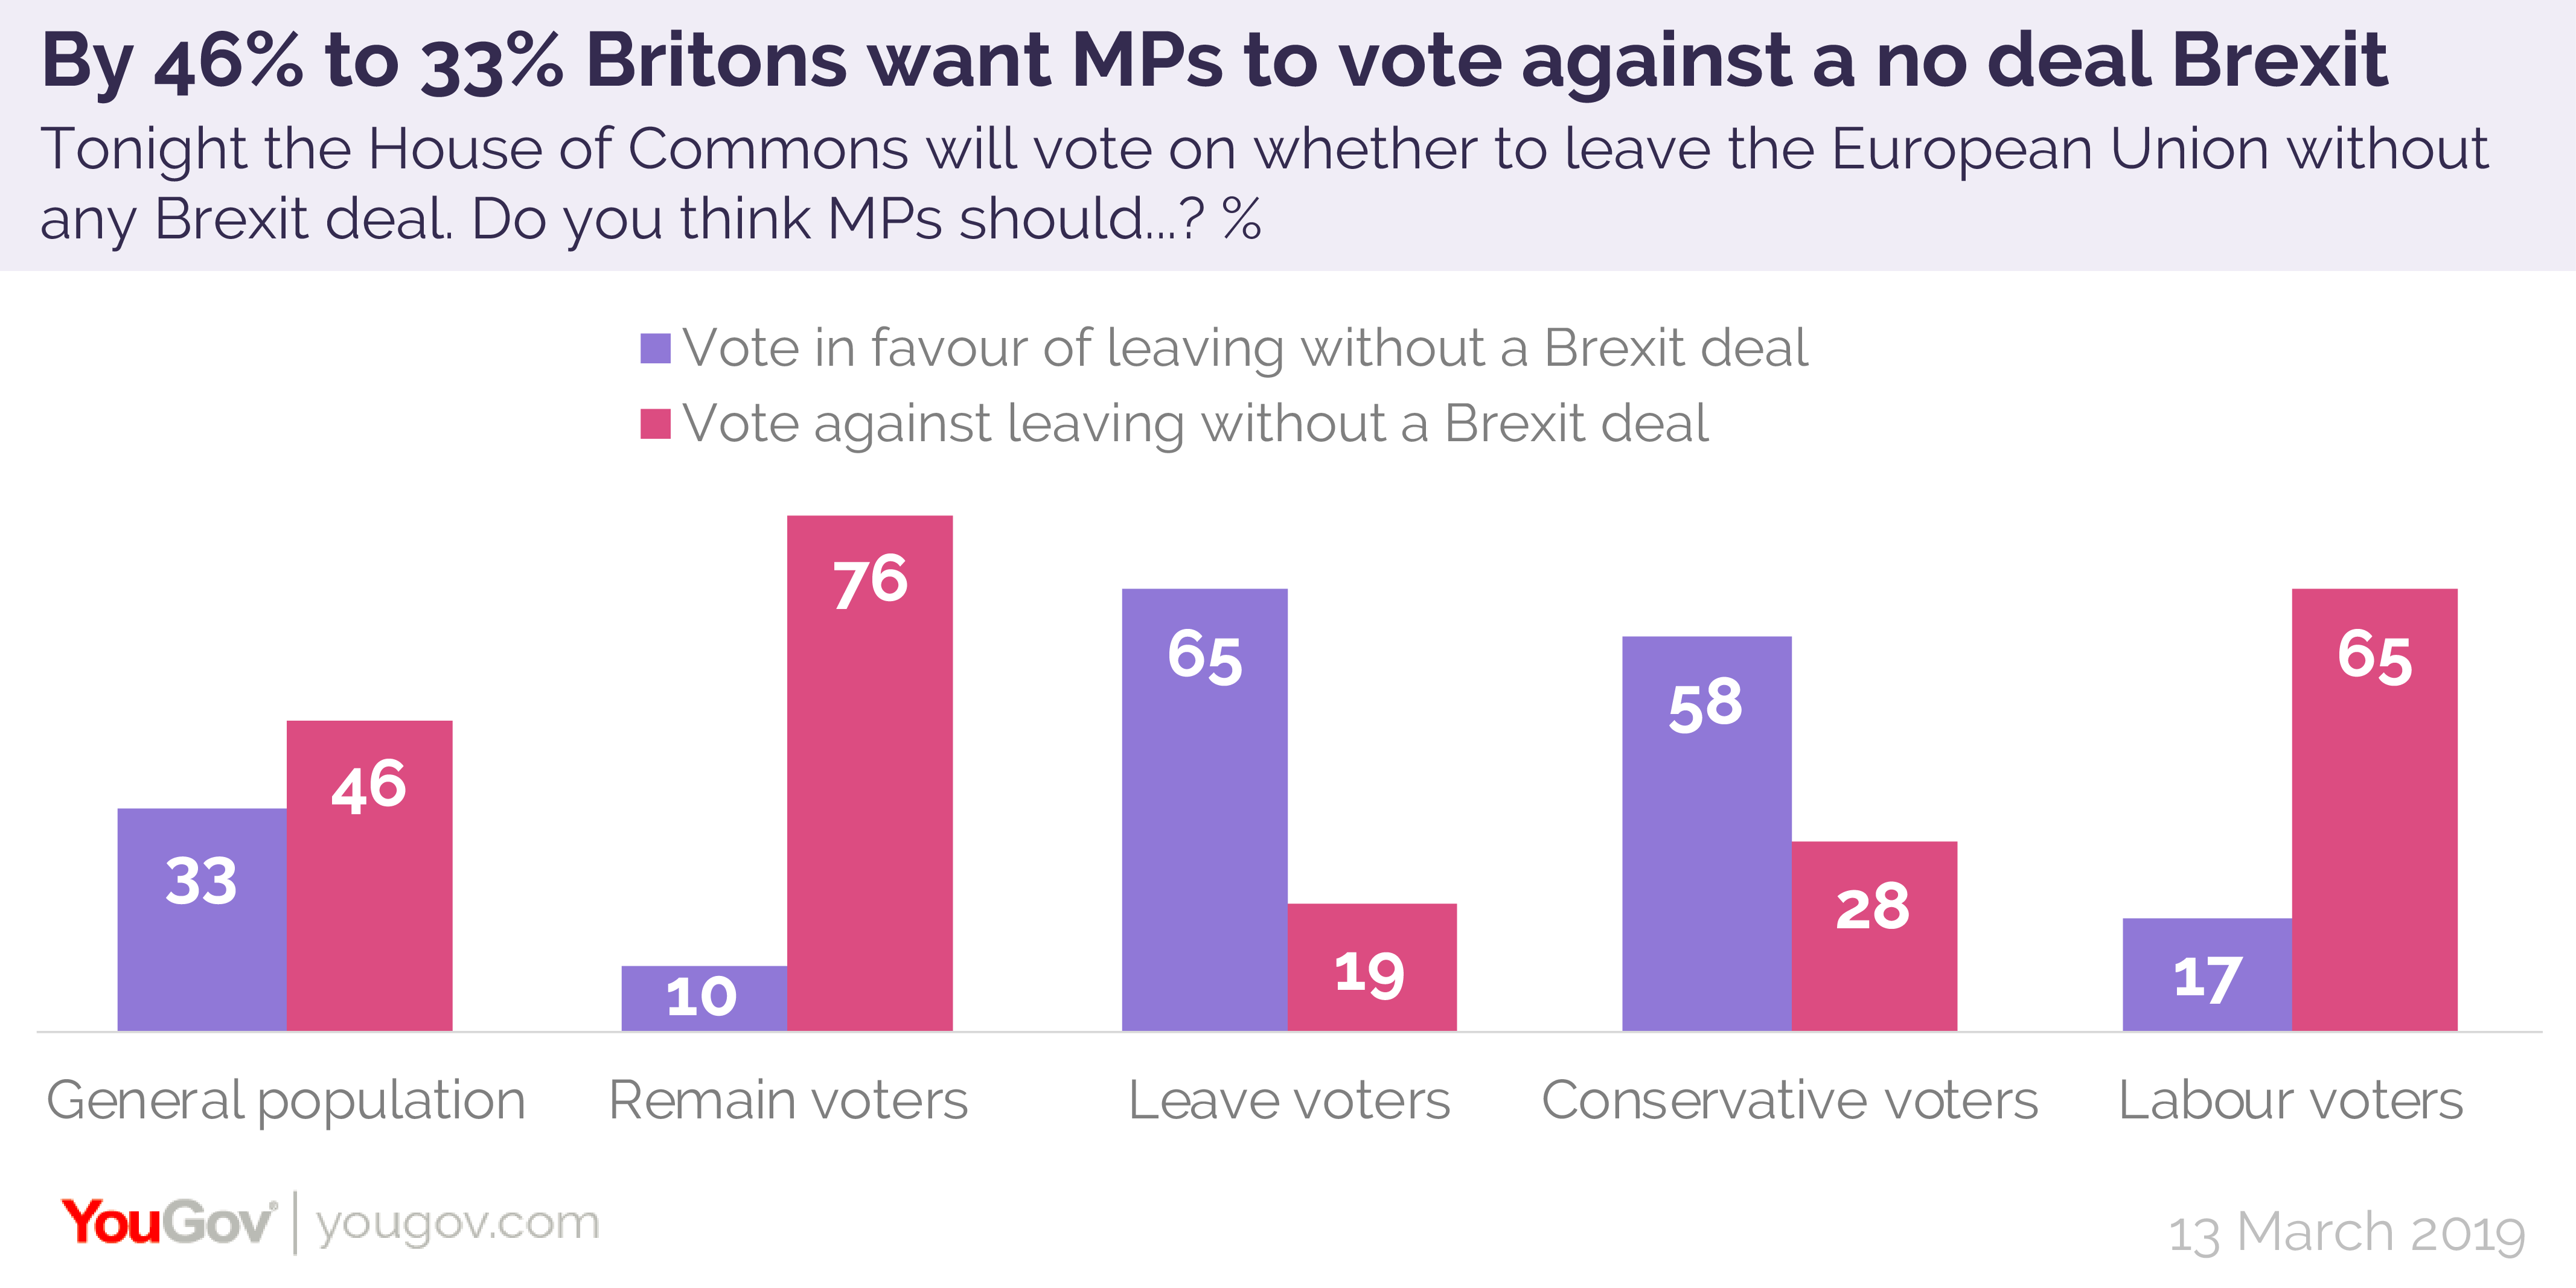 By 46% to 33% Britons want MPs to vote against a No Deal Brexit | YouGov4267 x 2134